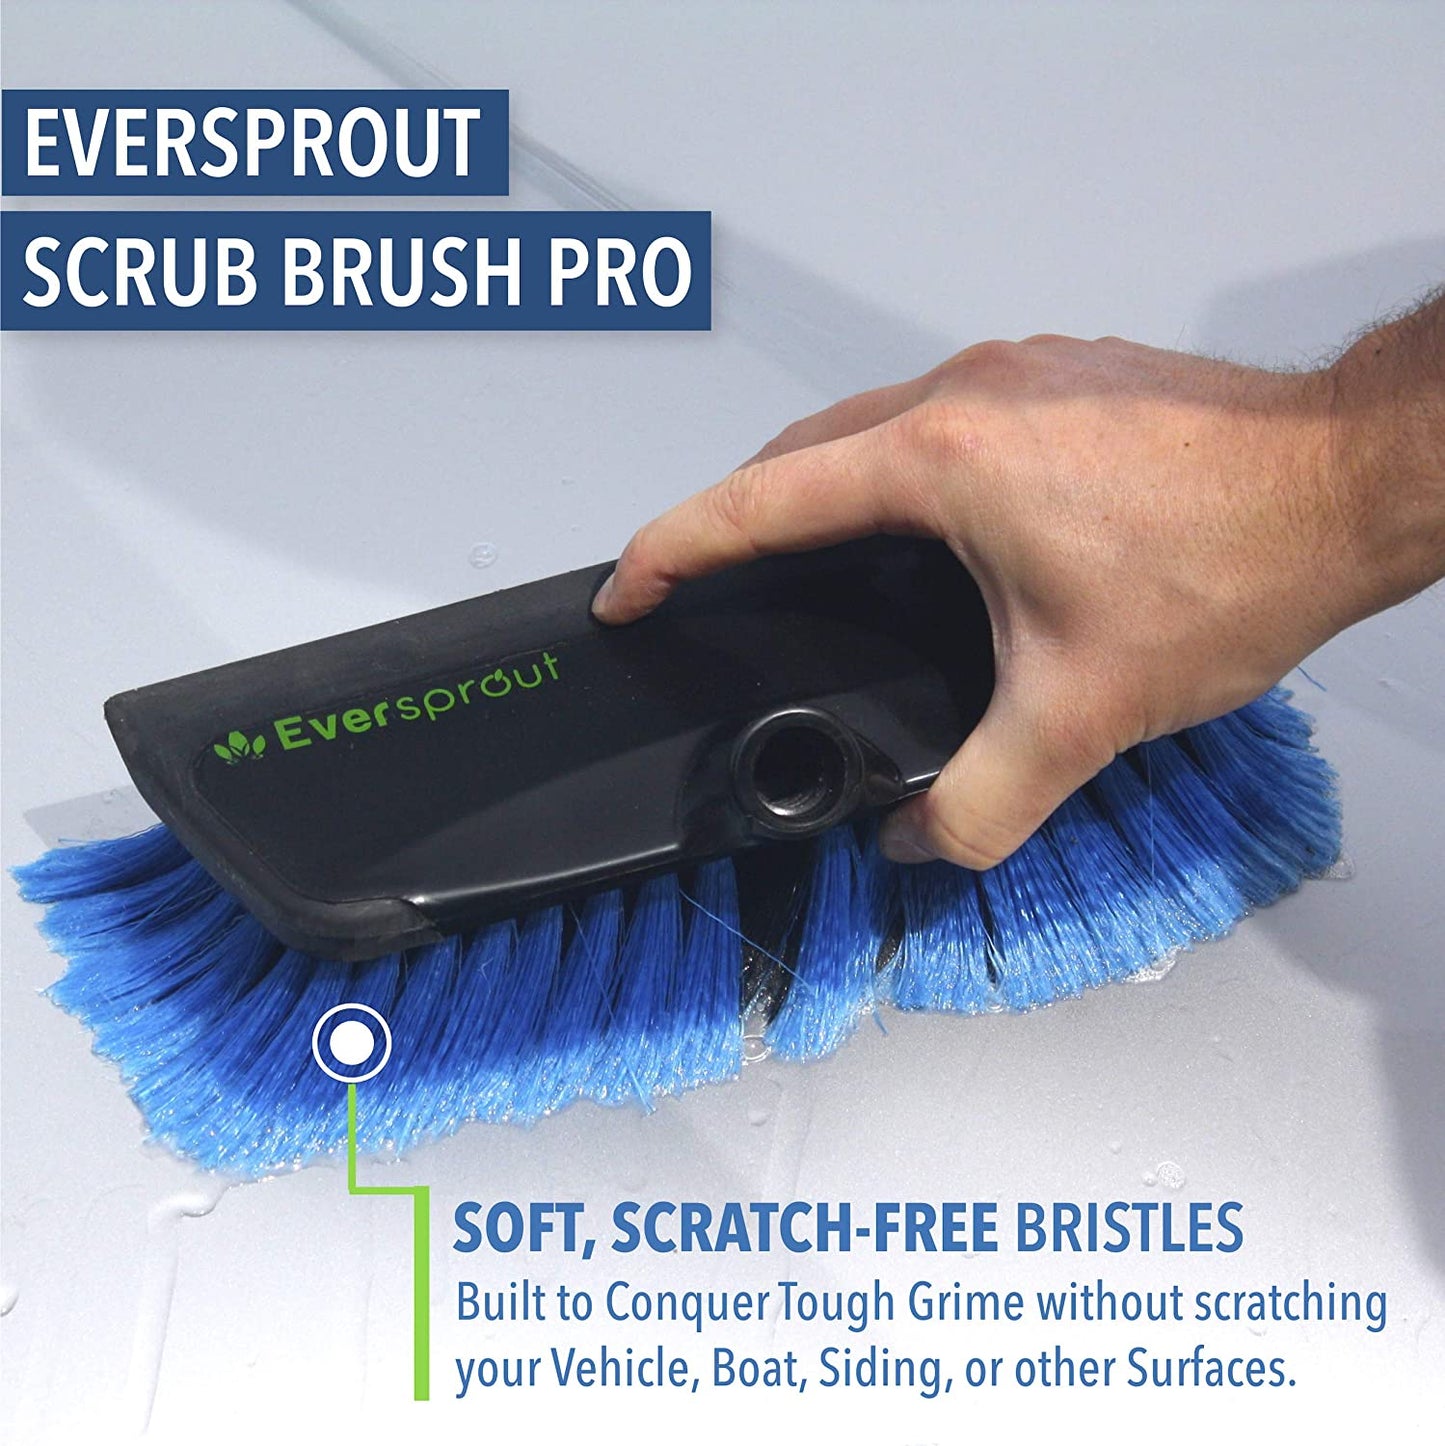 1.5-to-3.5 Foot Scrub Brush | Built-in Rubber Bumper | Lightweight Extension Pole Handle | Soft Bristles wash Car, RV, Boat, Solar Panel, Deck | Shower Brush for Cleaning | Floor Brush